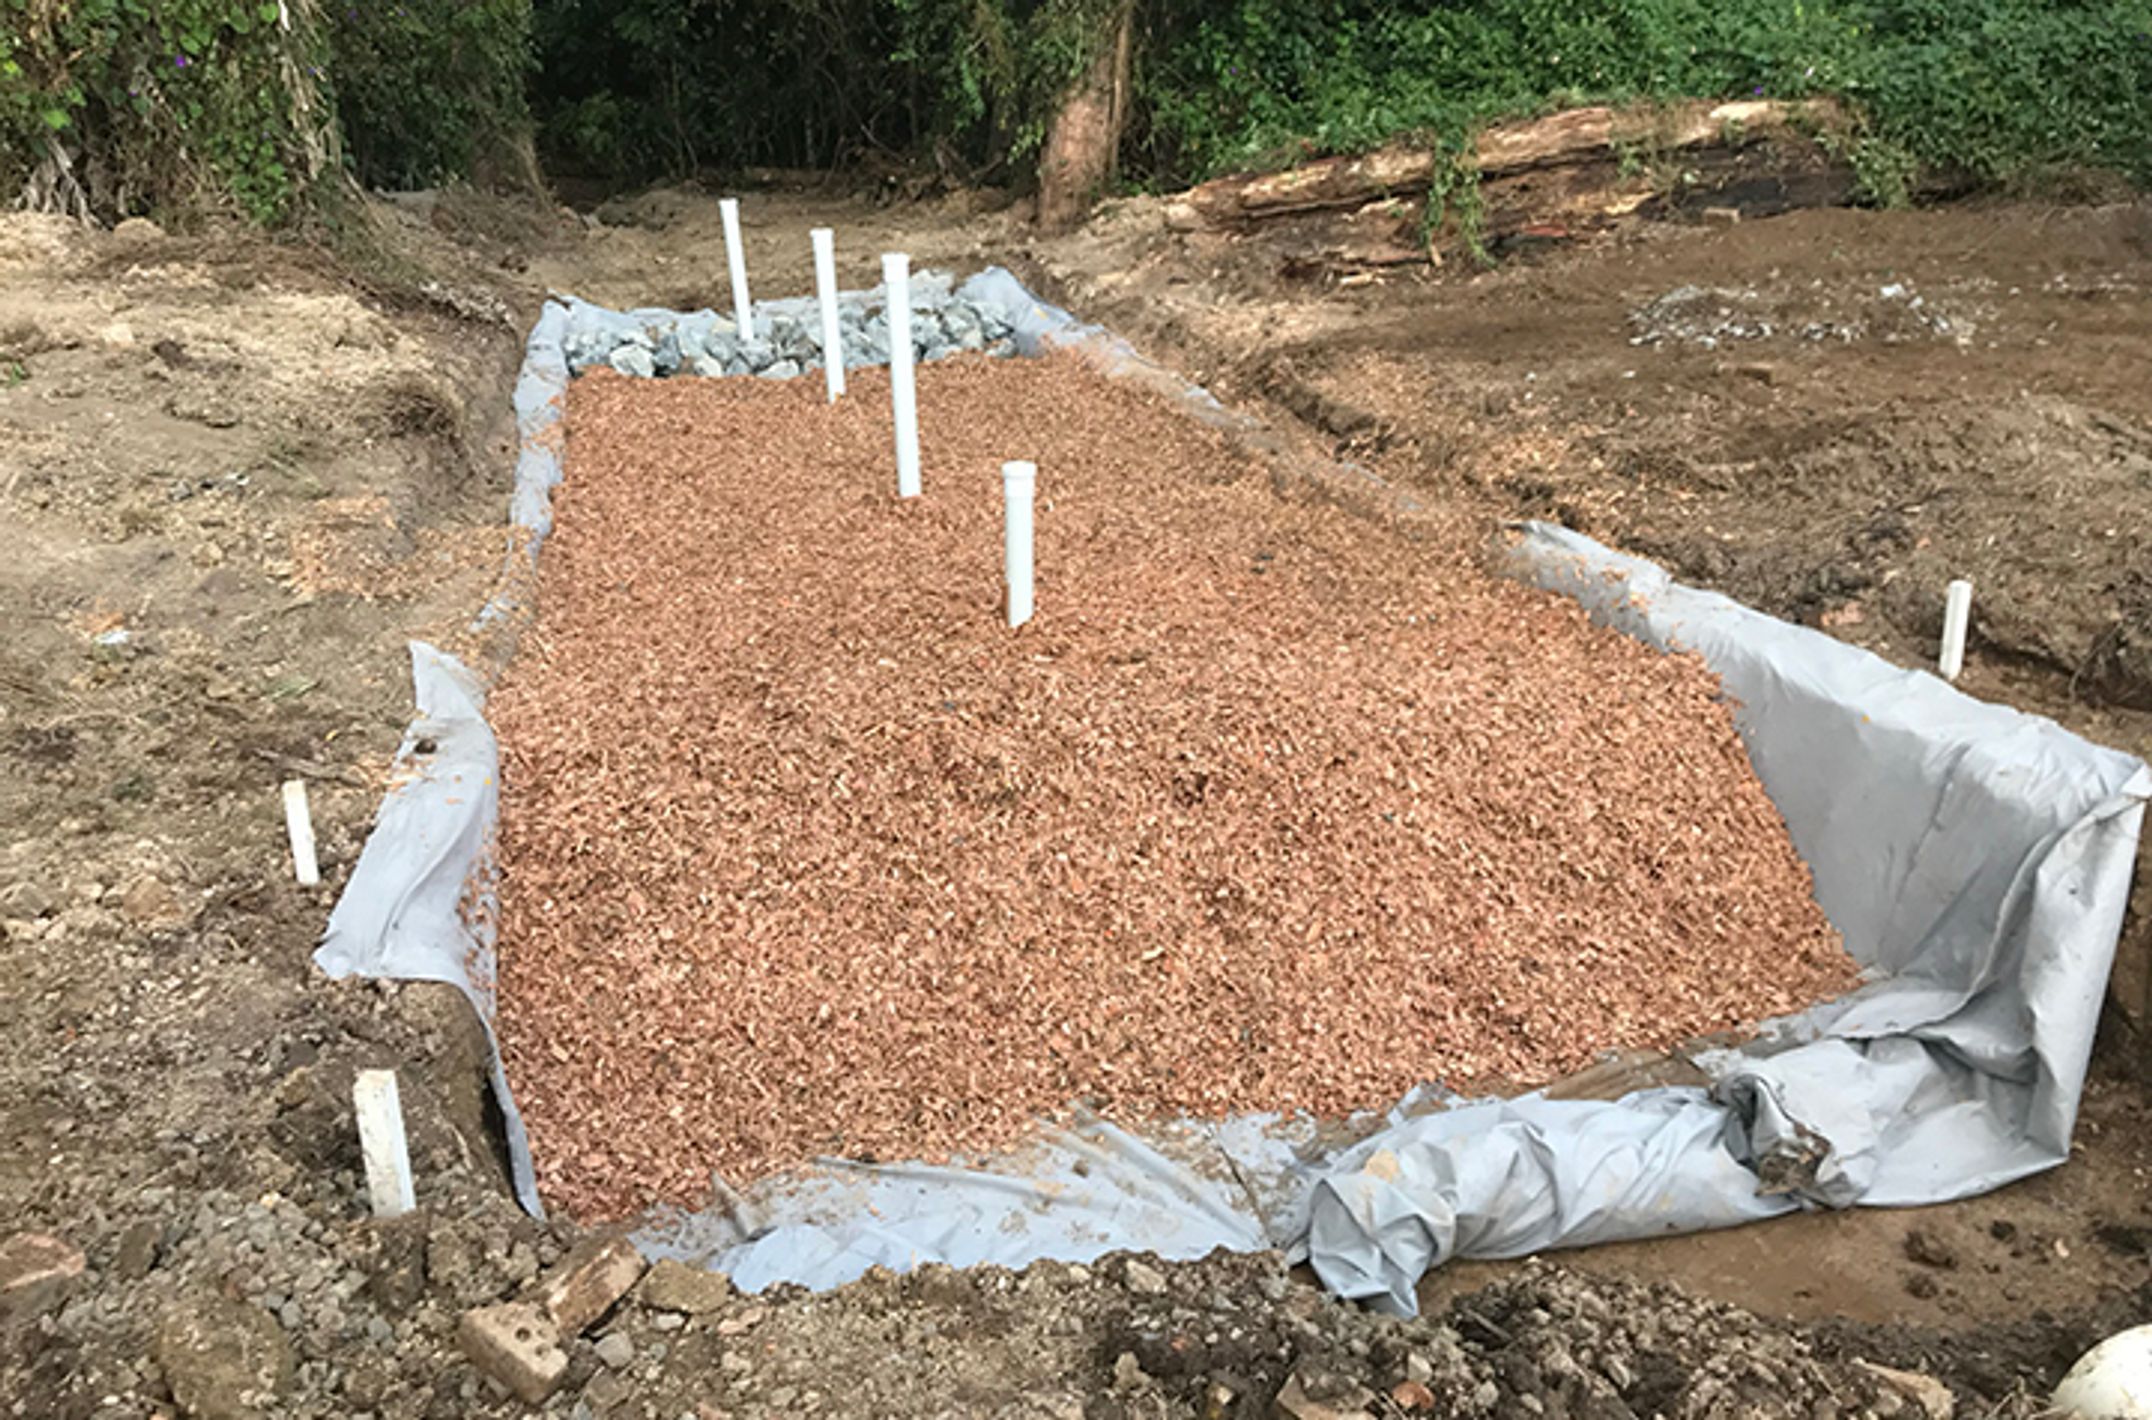 Surface flow bioreactor filled with woodchips and pipes credit Shane White